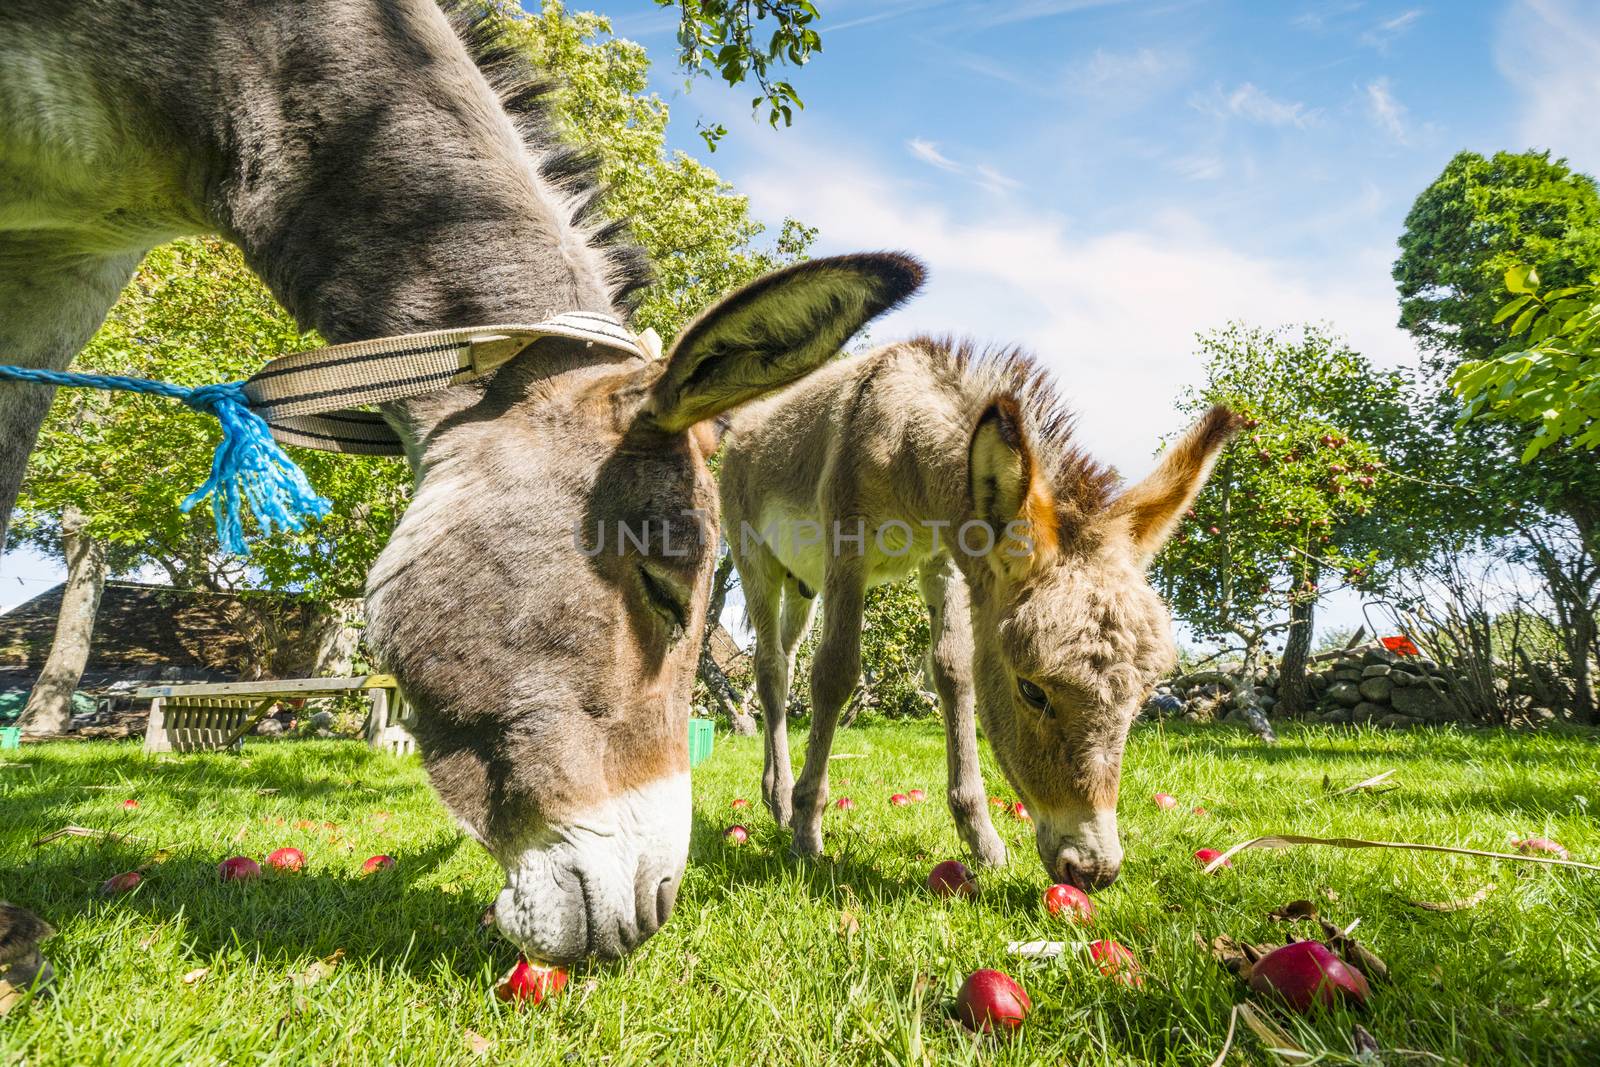 Two donkeys eating red apples in an idyllic garden in the summer